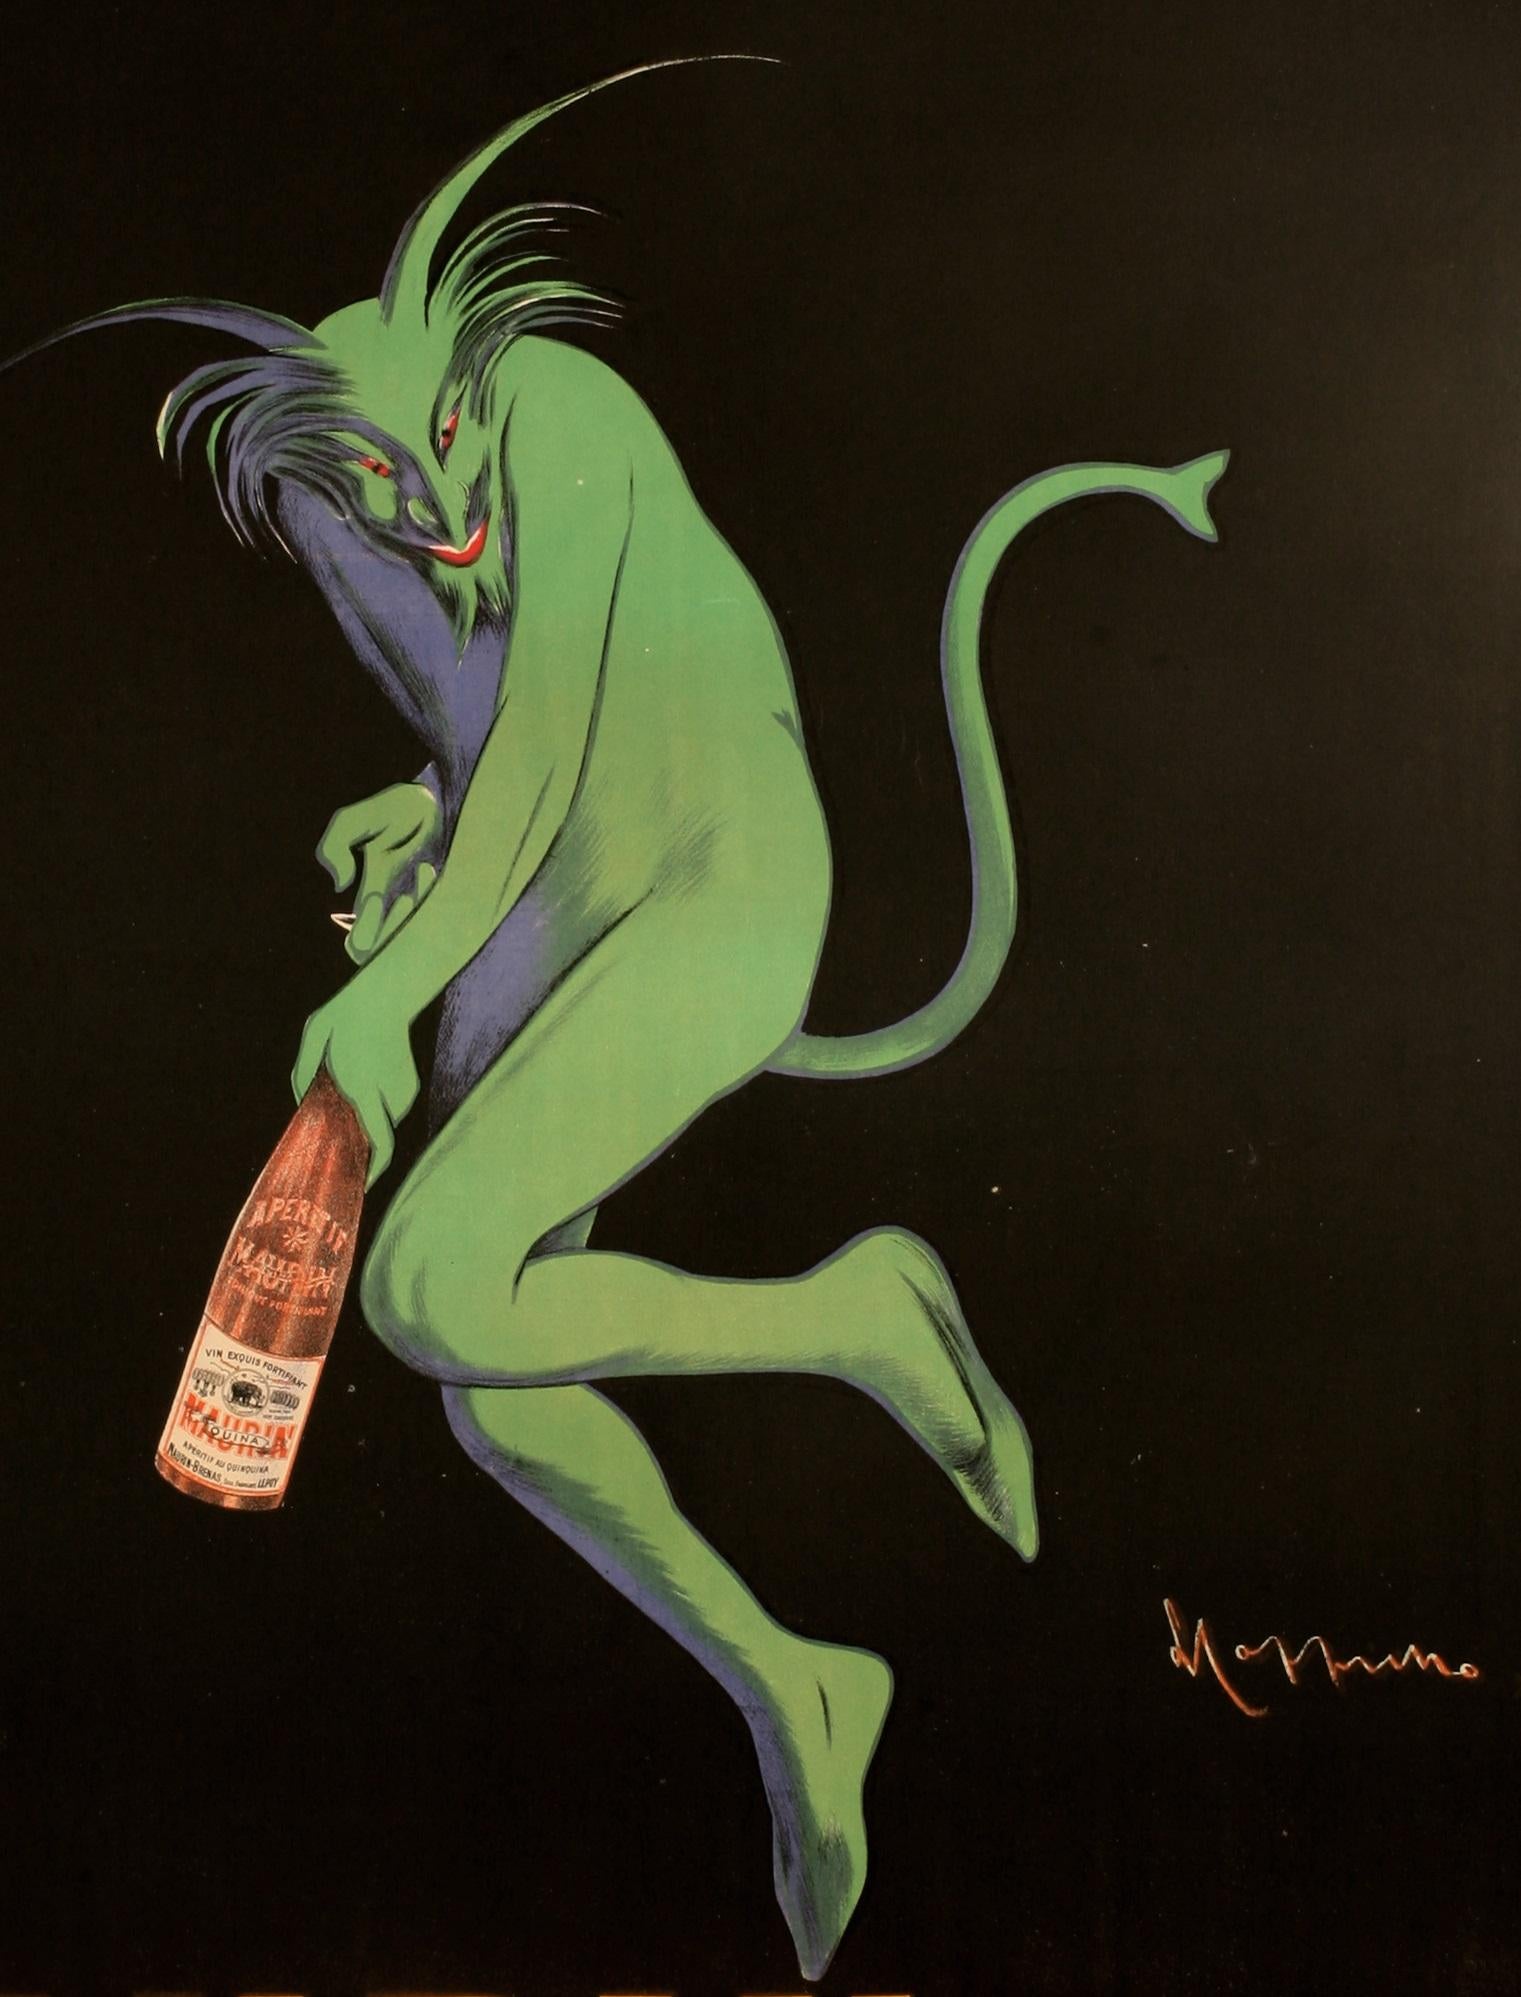 Original Vintage Alcohol Poster for Maurin Quina dating from 1906 by Leonetto Cappiello.

Artist: Leonetto Cappiello 
Title: Maurin Quina - Le Puy - France
Date: 1906 
Size: 44.9 x 60.6 in / 114 x 154 cm
Printer : Imp. P. Vercasson & Cie., 43. rue